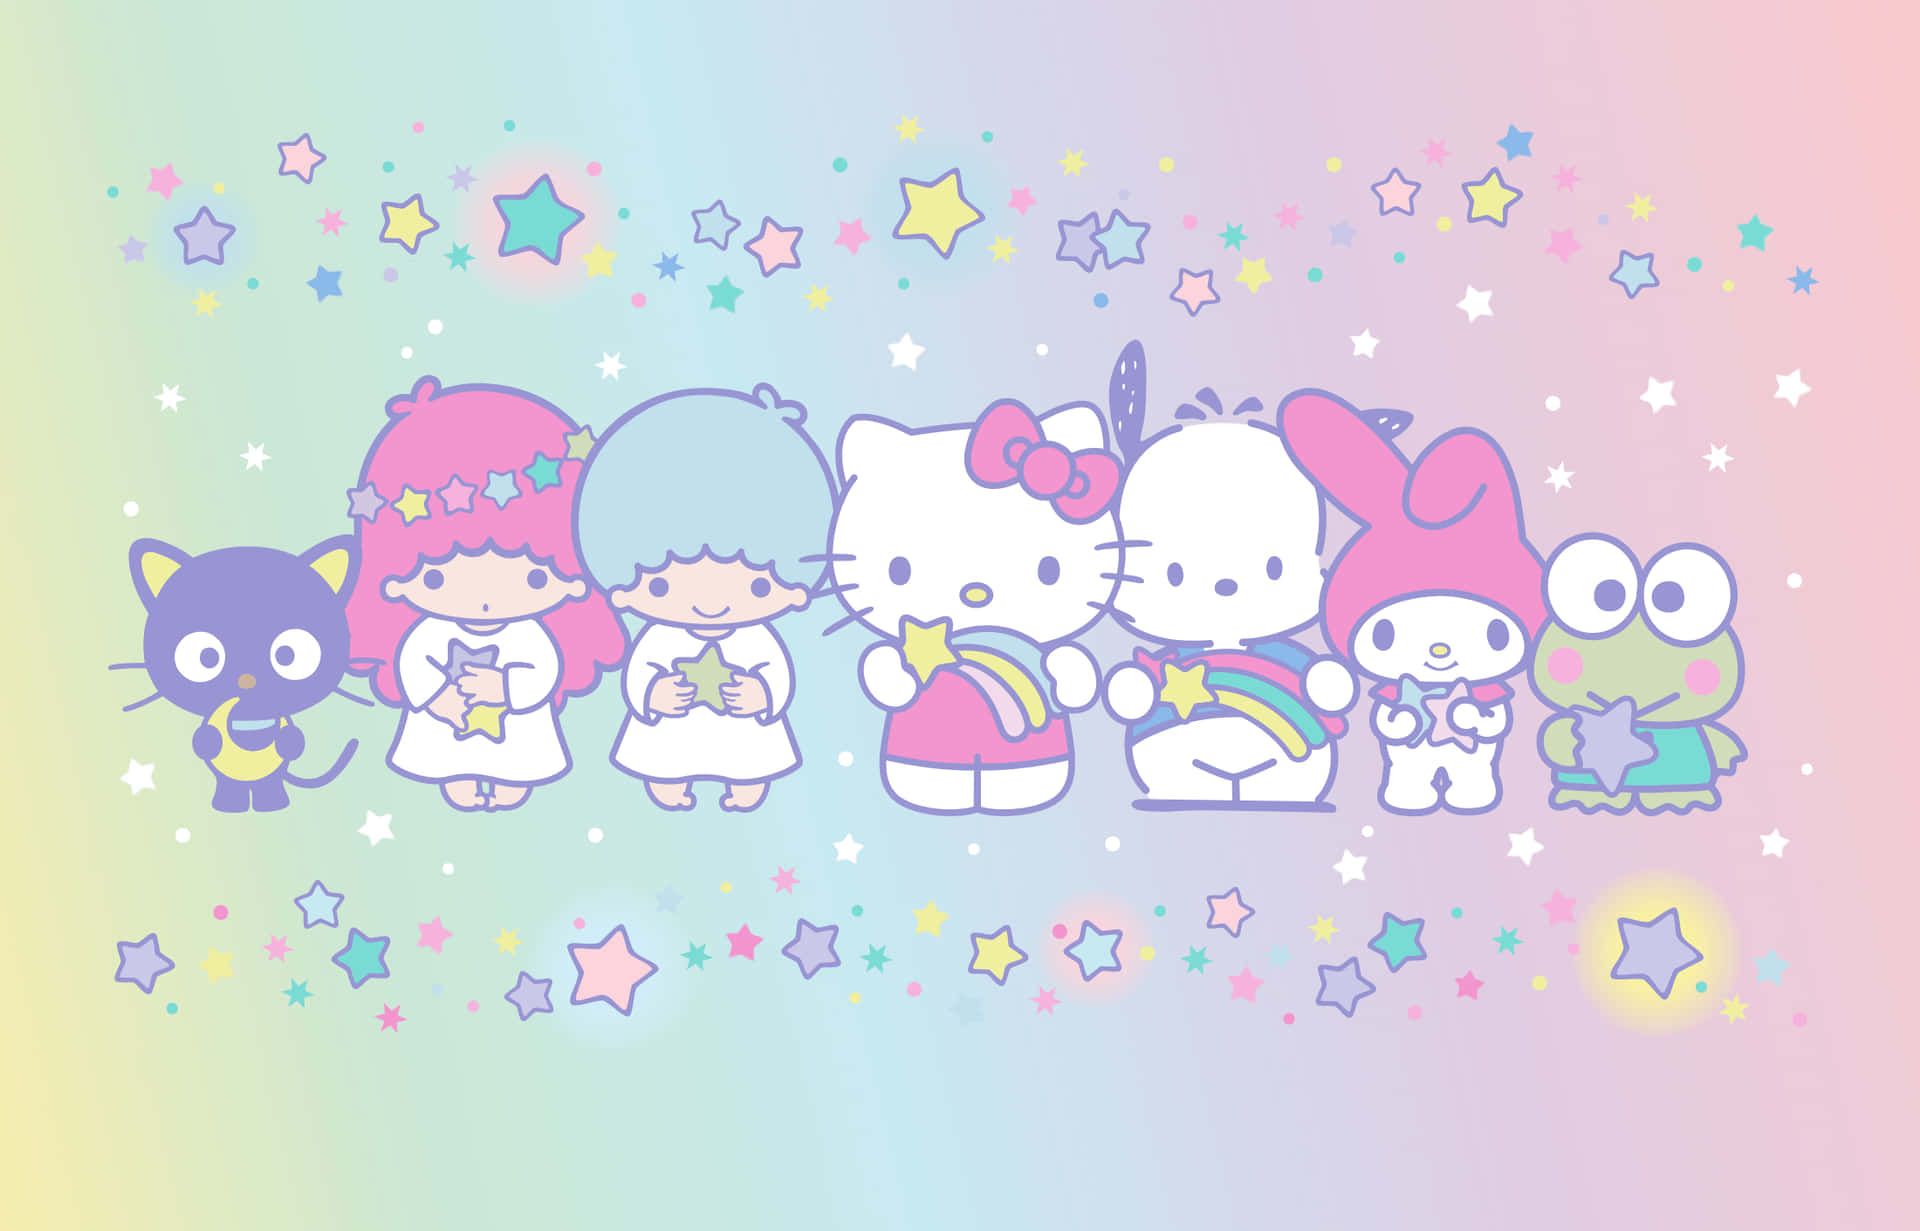 Sanrio Characters HD Wallpaper, Free Sanrio Characters Wallpaper Image For All Devices